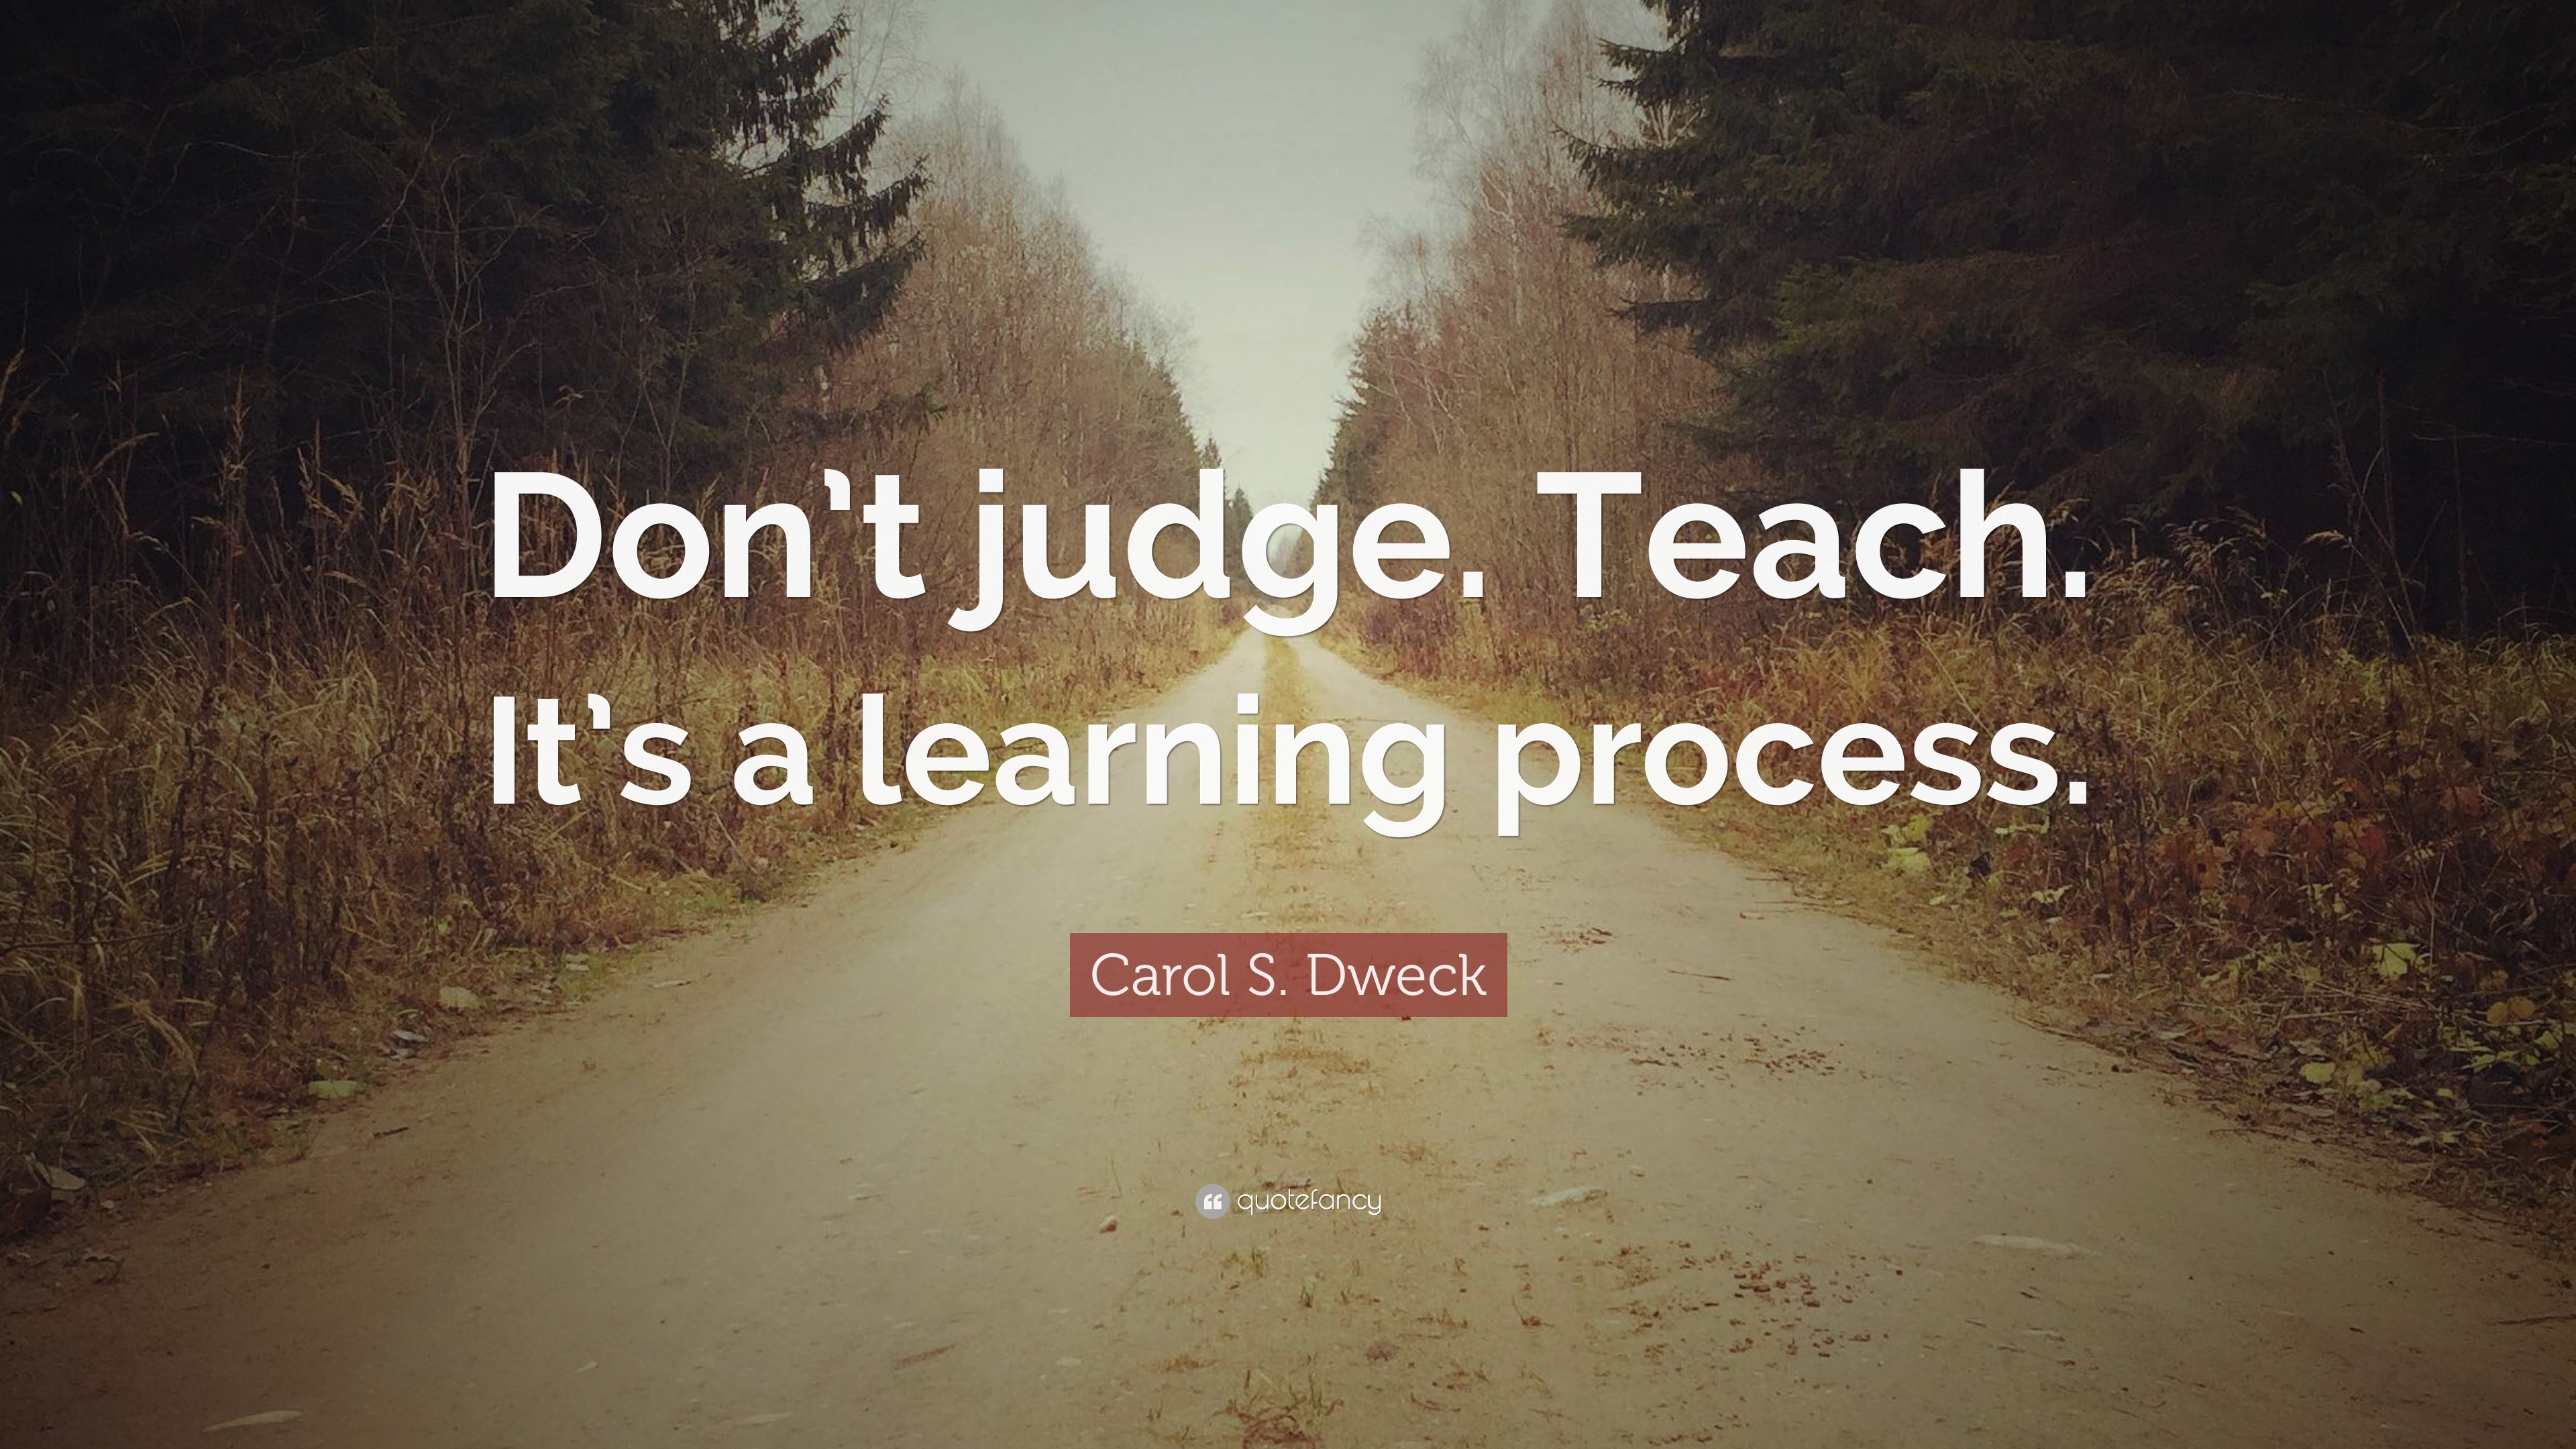 Carol S. Dweck Quote: “Don't judge. Teach. It's a learning process.”